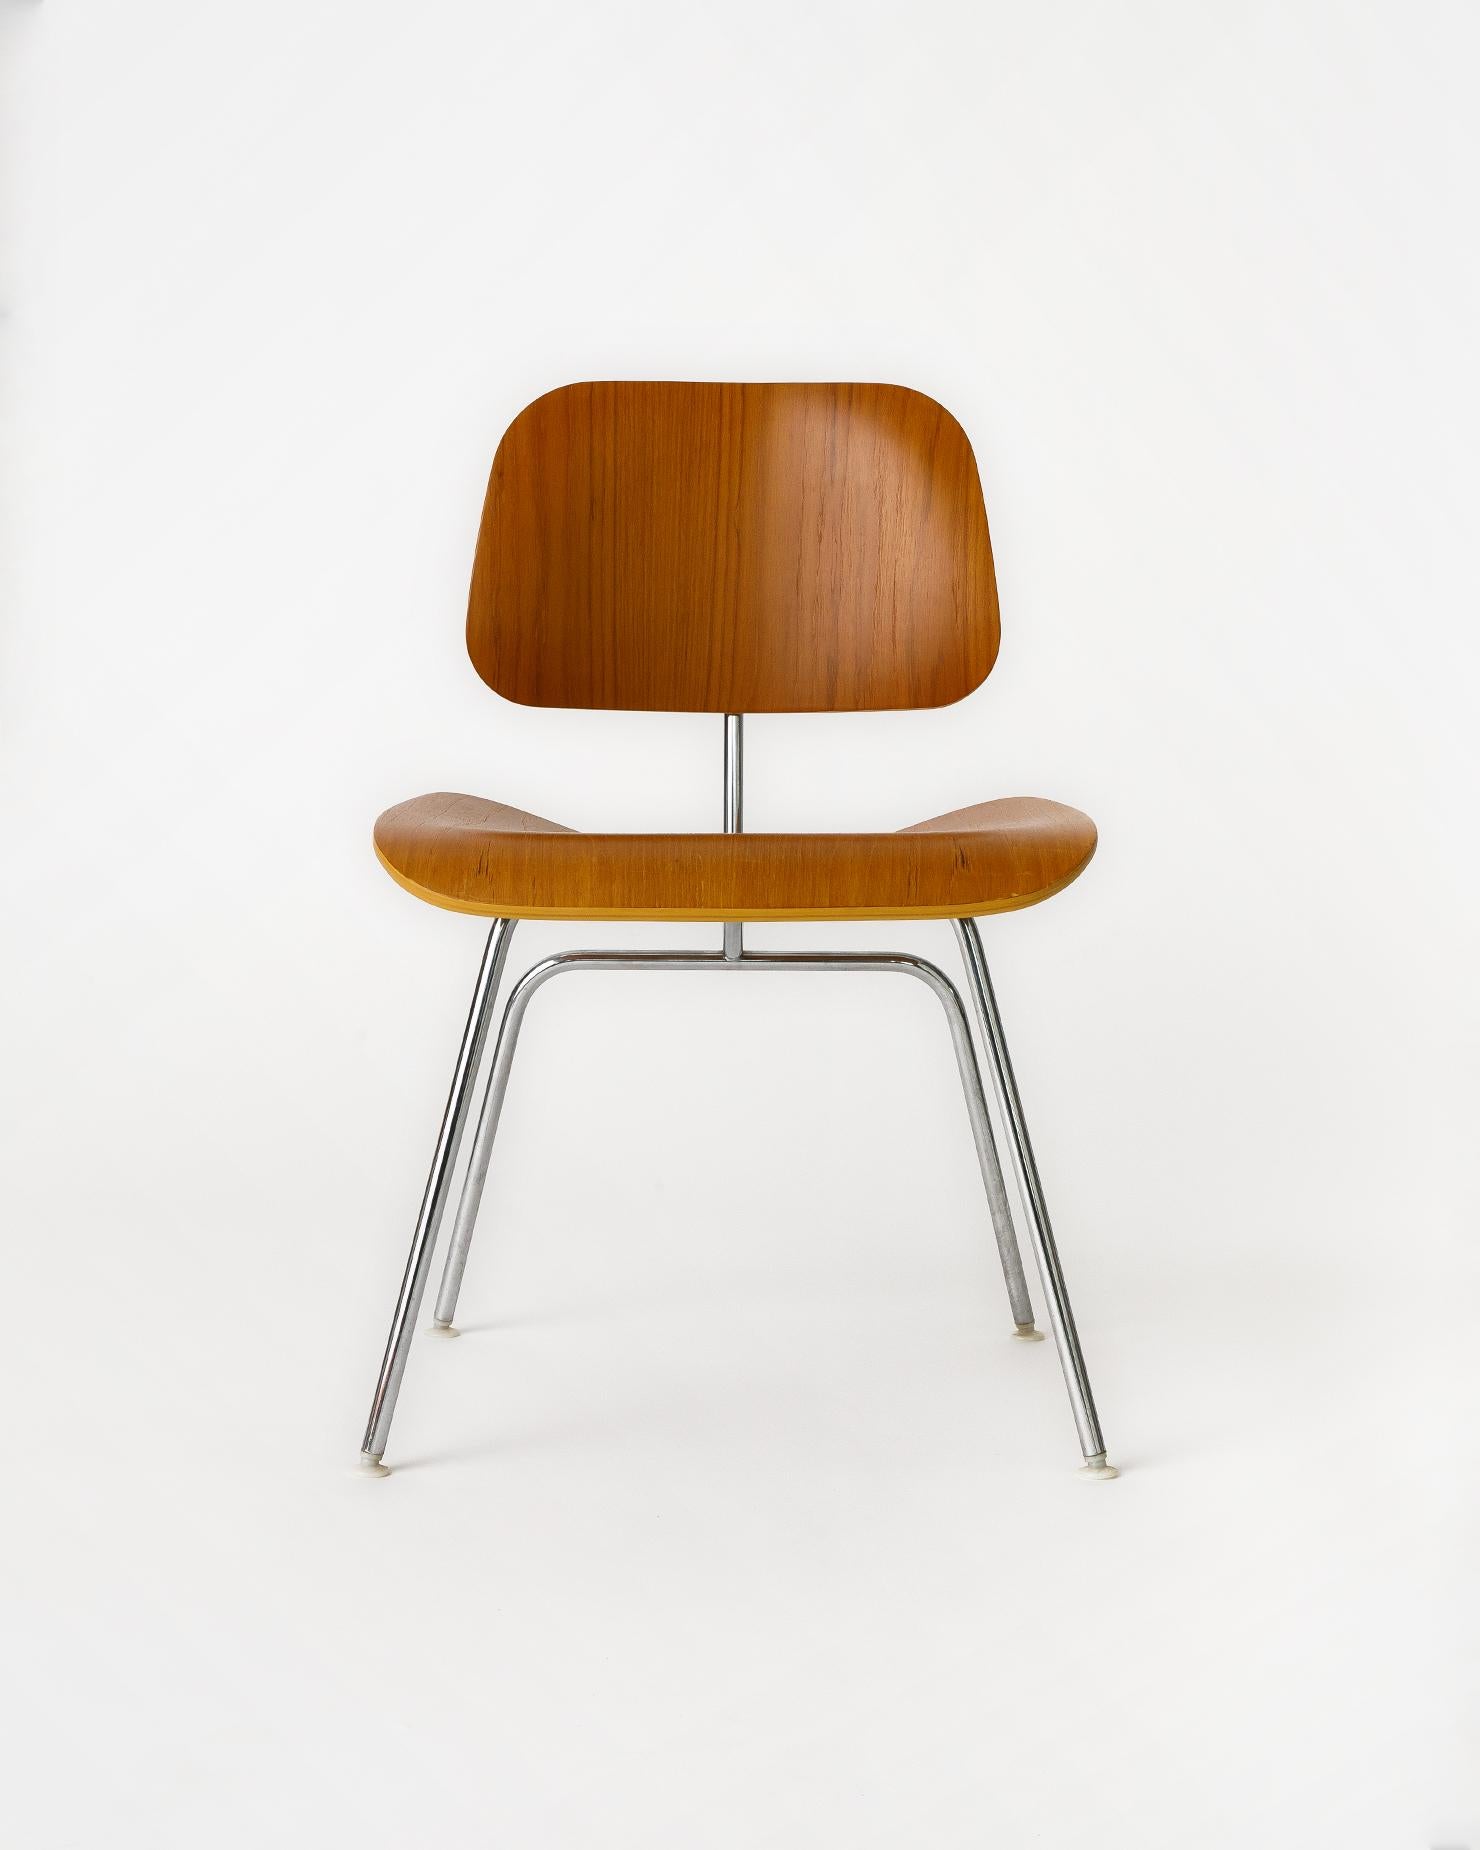 Metal Eames Molded Plywood Dcm in Oak by Charles & Ray Eames for Herman Miller